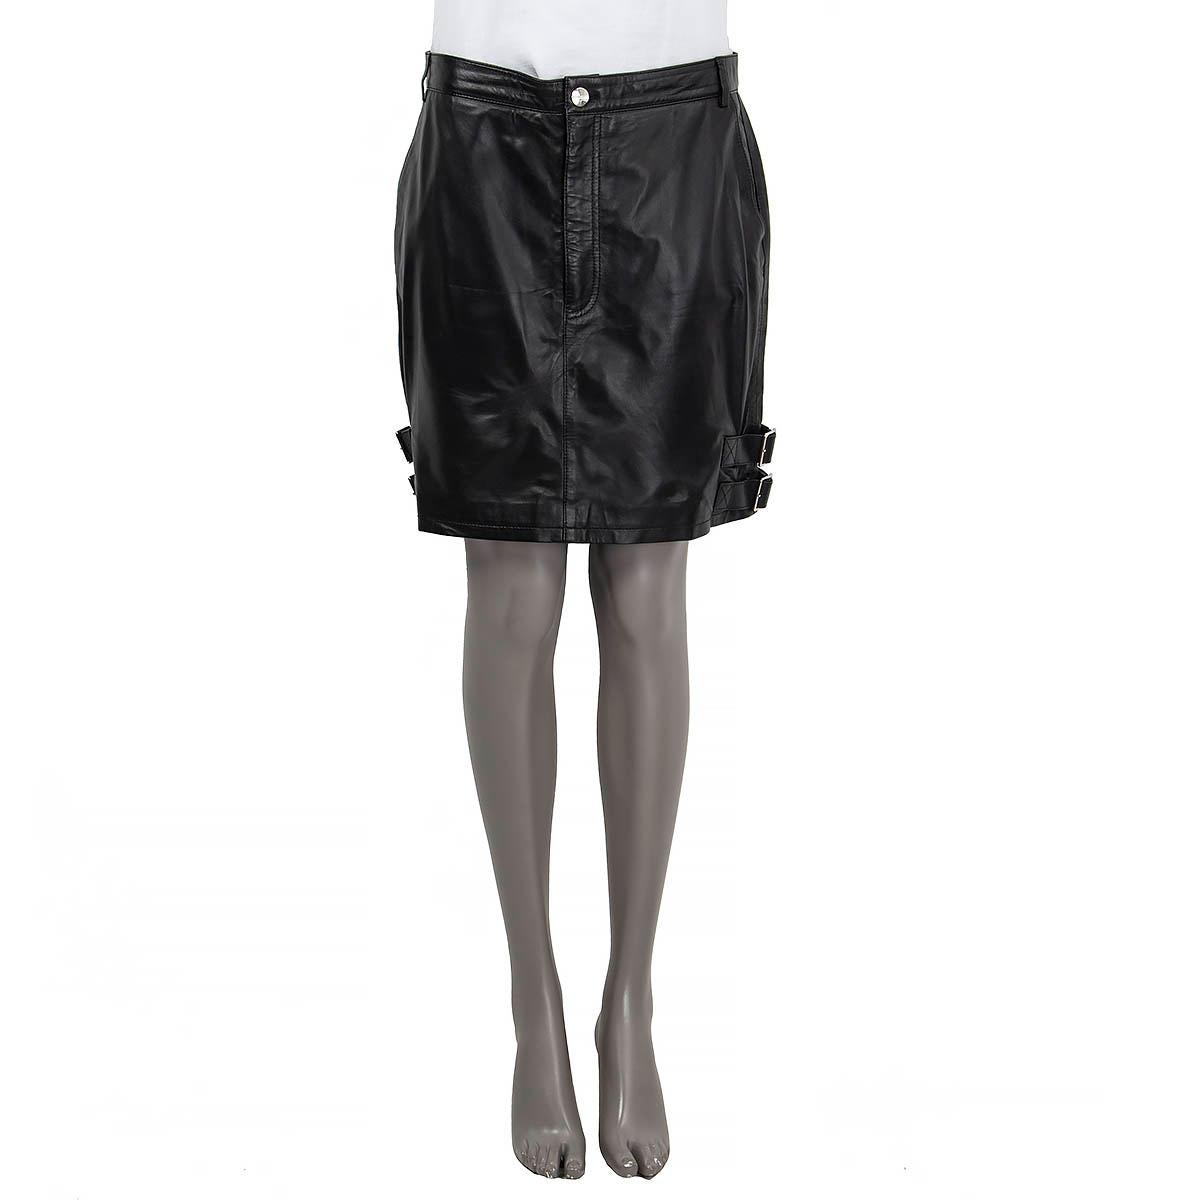 100% authentic 100% authentic Altuzarra buckle skirt in black leather (100%). Features belt loops, two slit pockets on the front and on the back. Opens with a button and a zipper on the front. Lined in black polyester (100%). Has been worn and is in